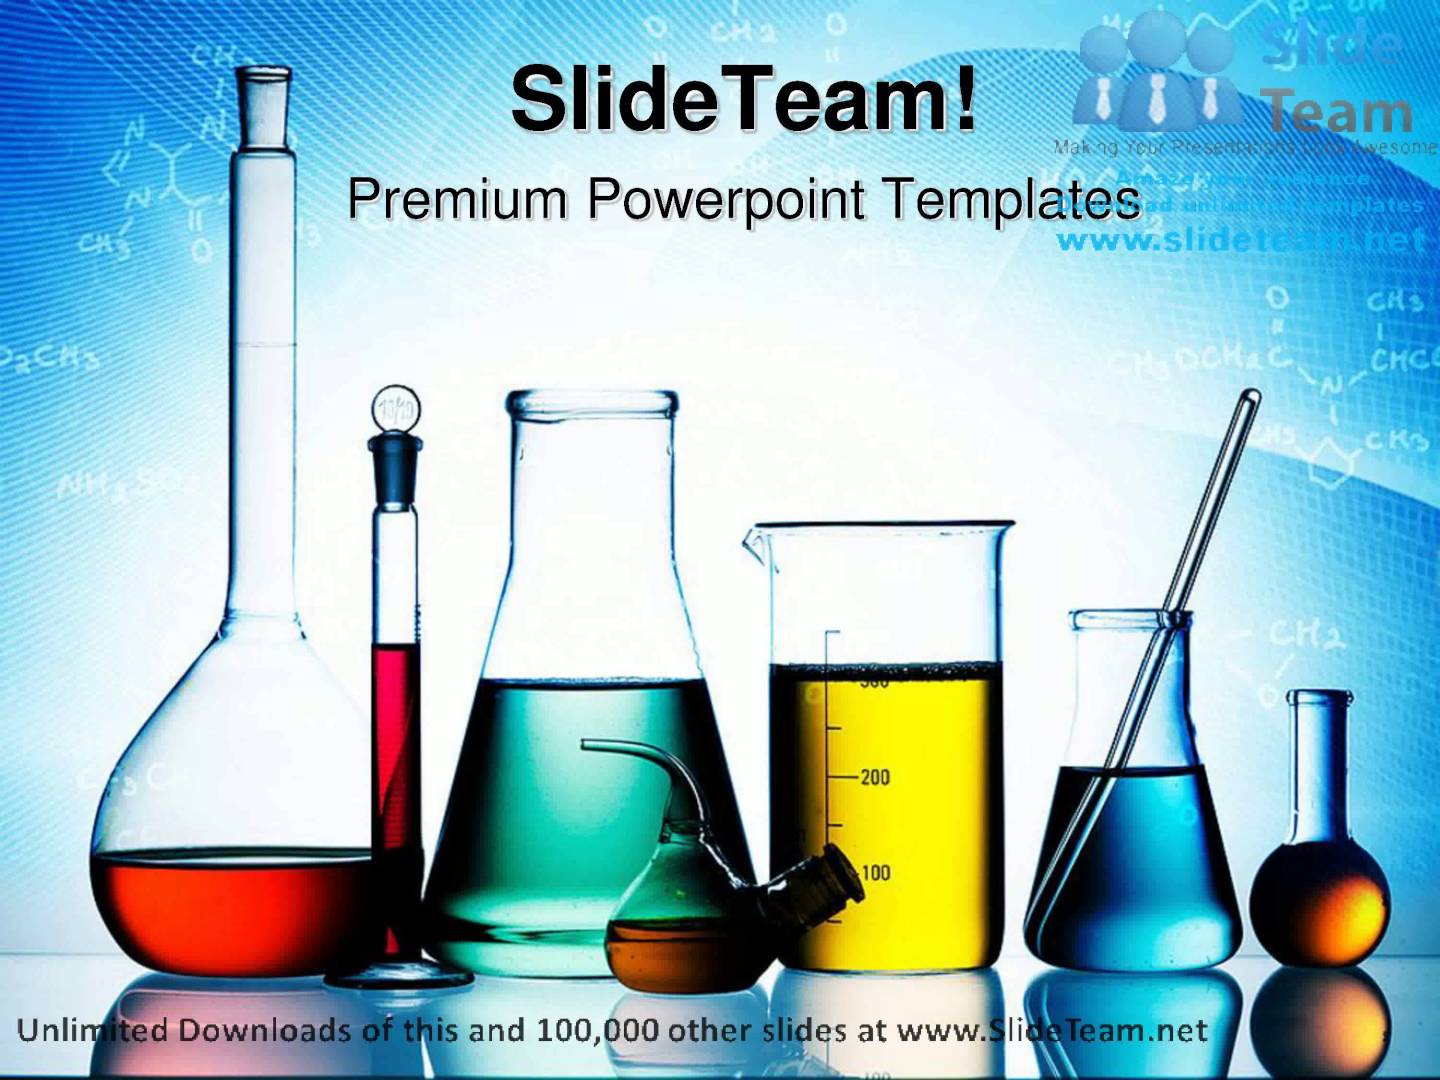 Backgrounds Powerpoint Chemistry Wallpaper Cave